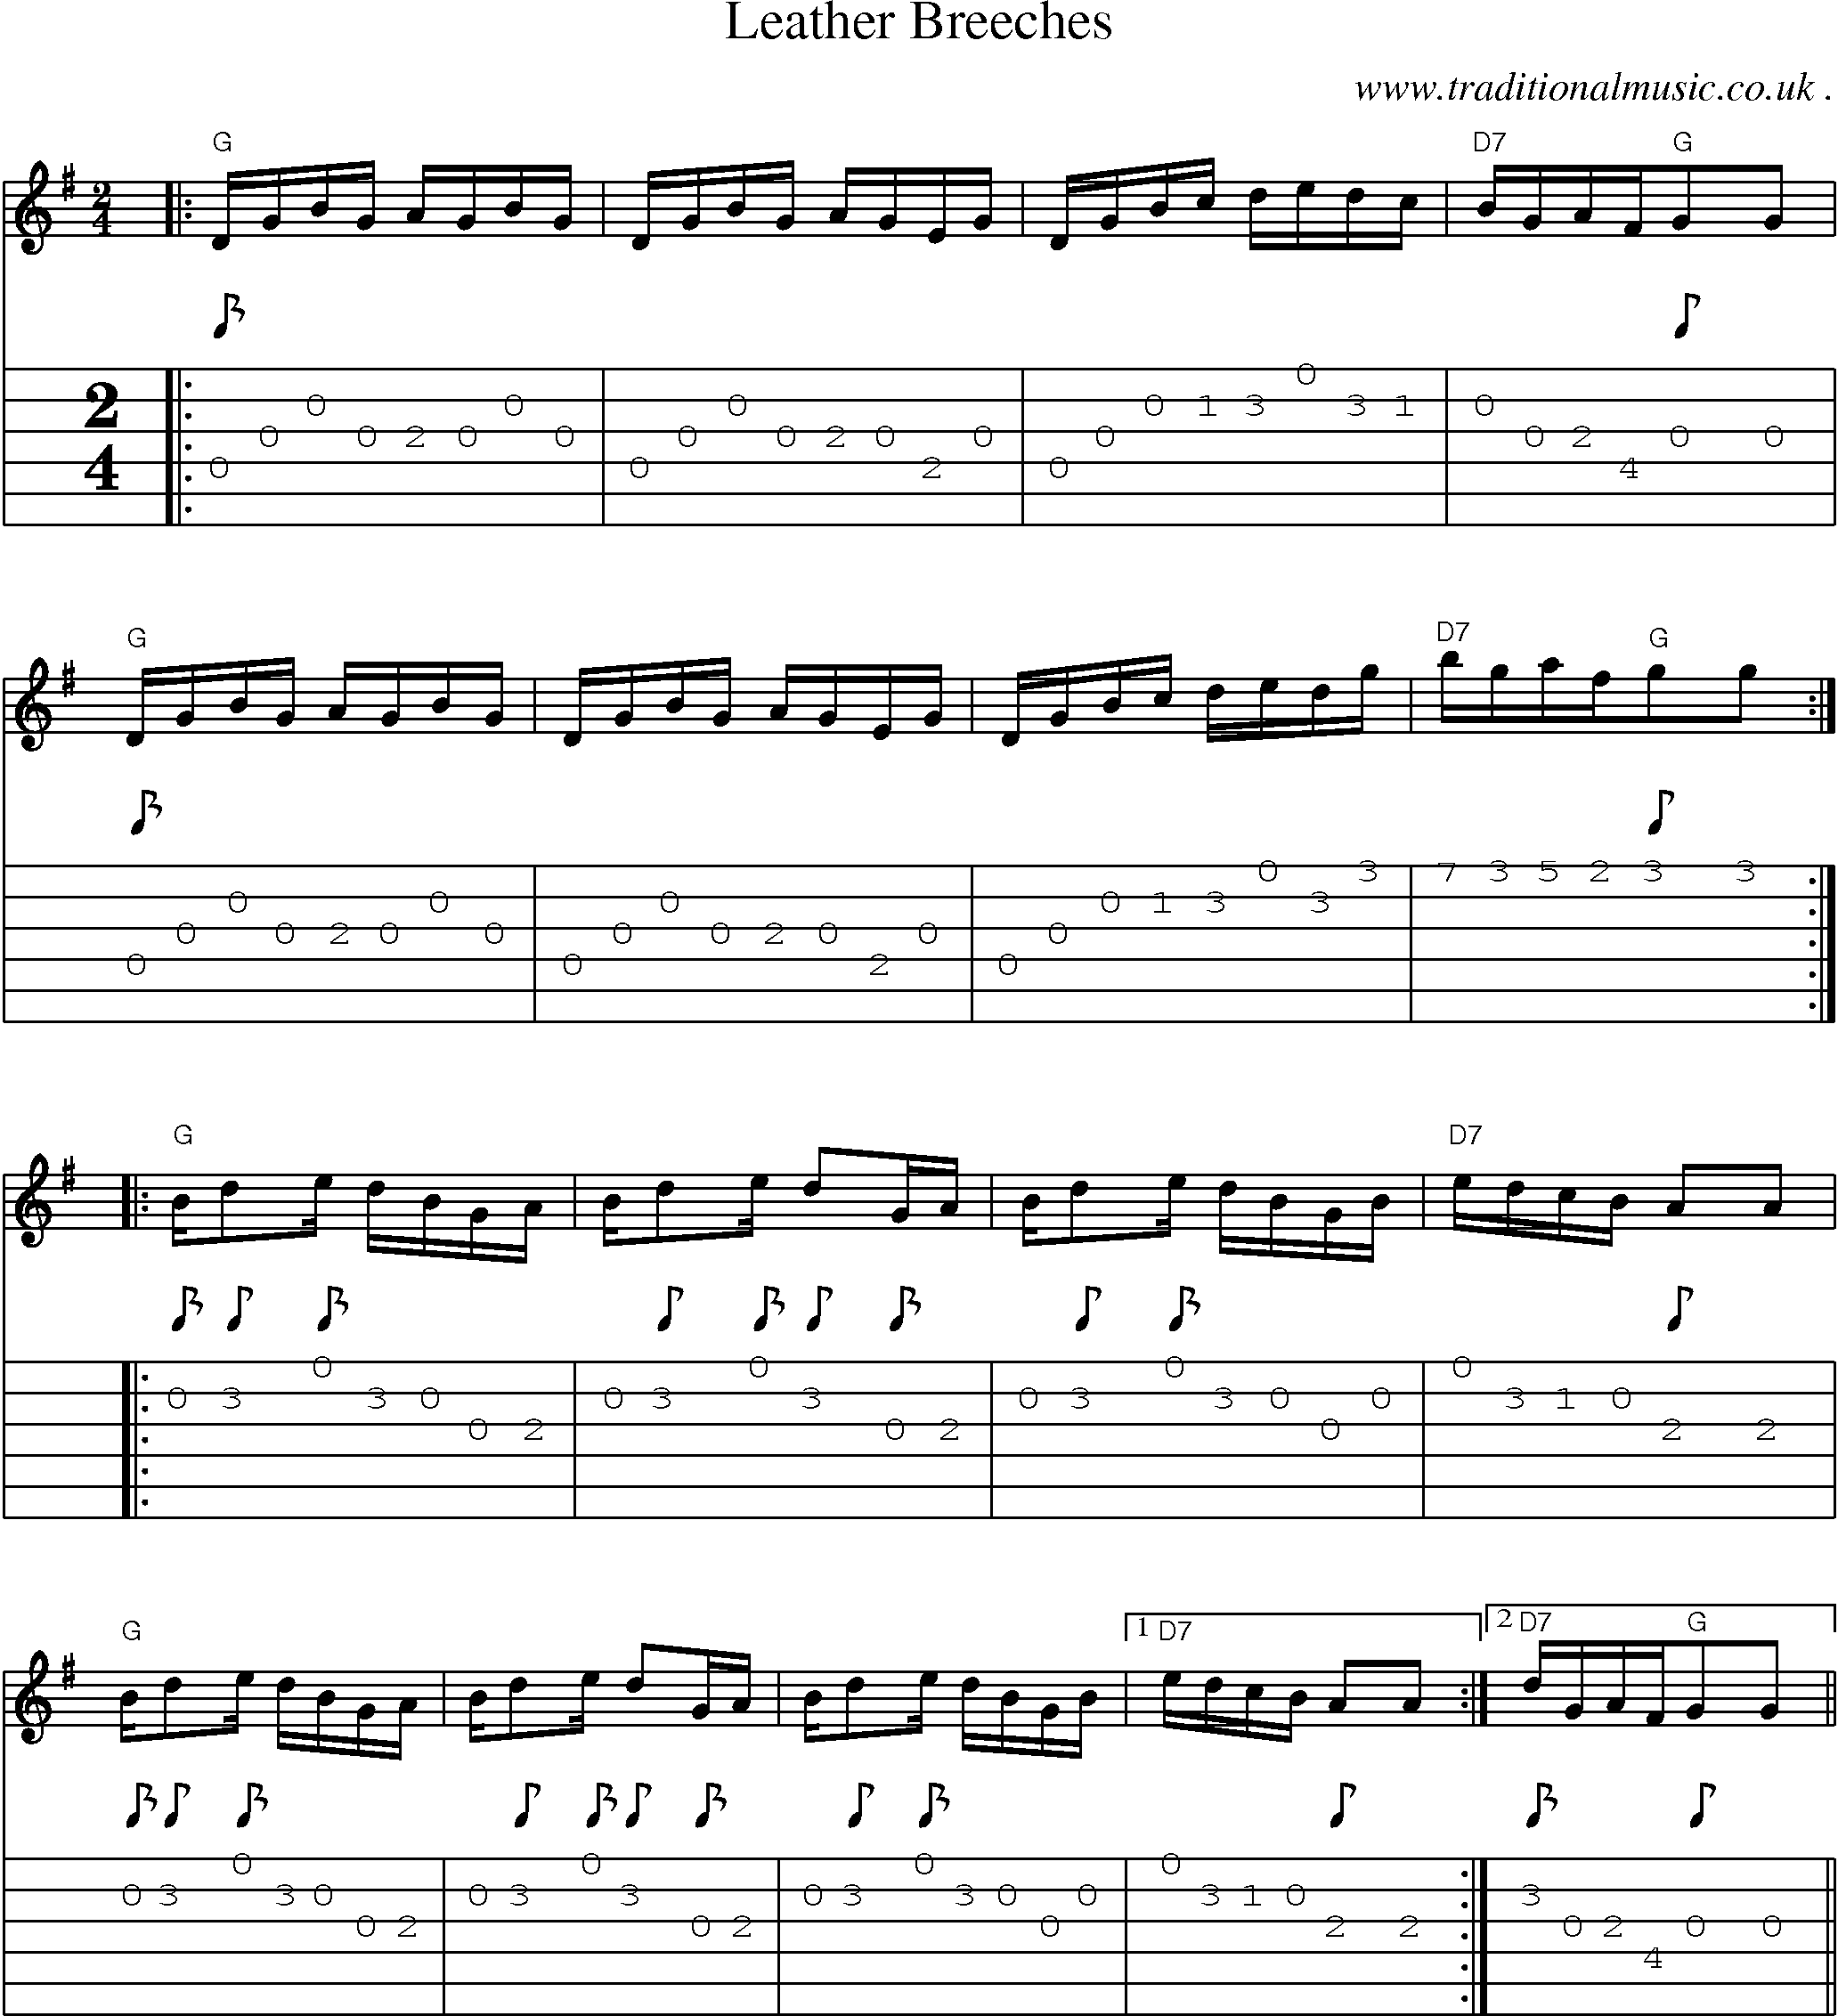 Sheet-Music and Guitar Tabs for Leather Breeches